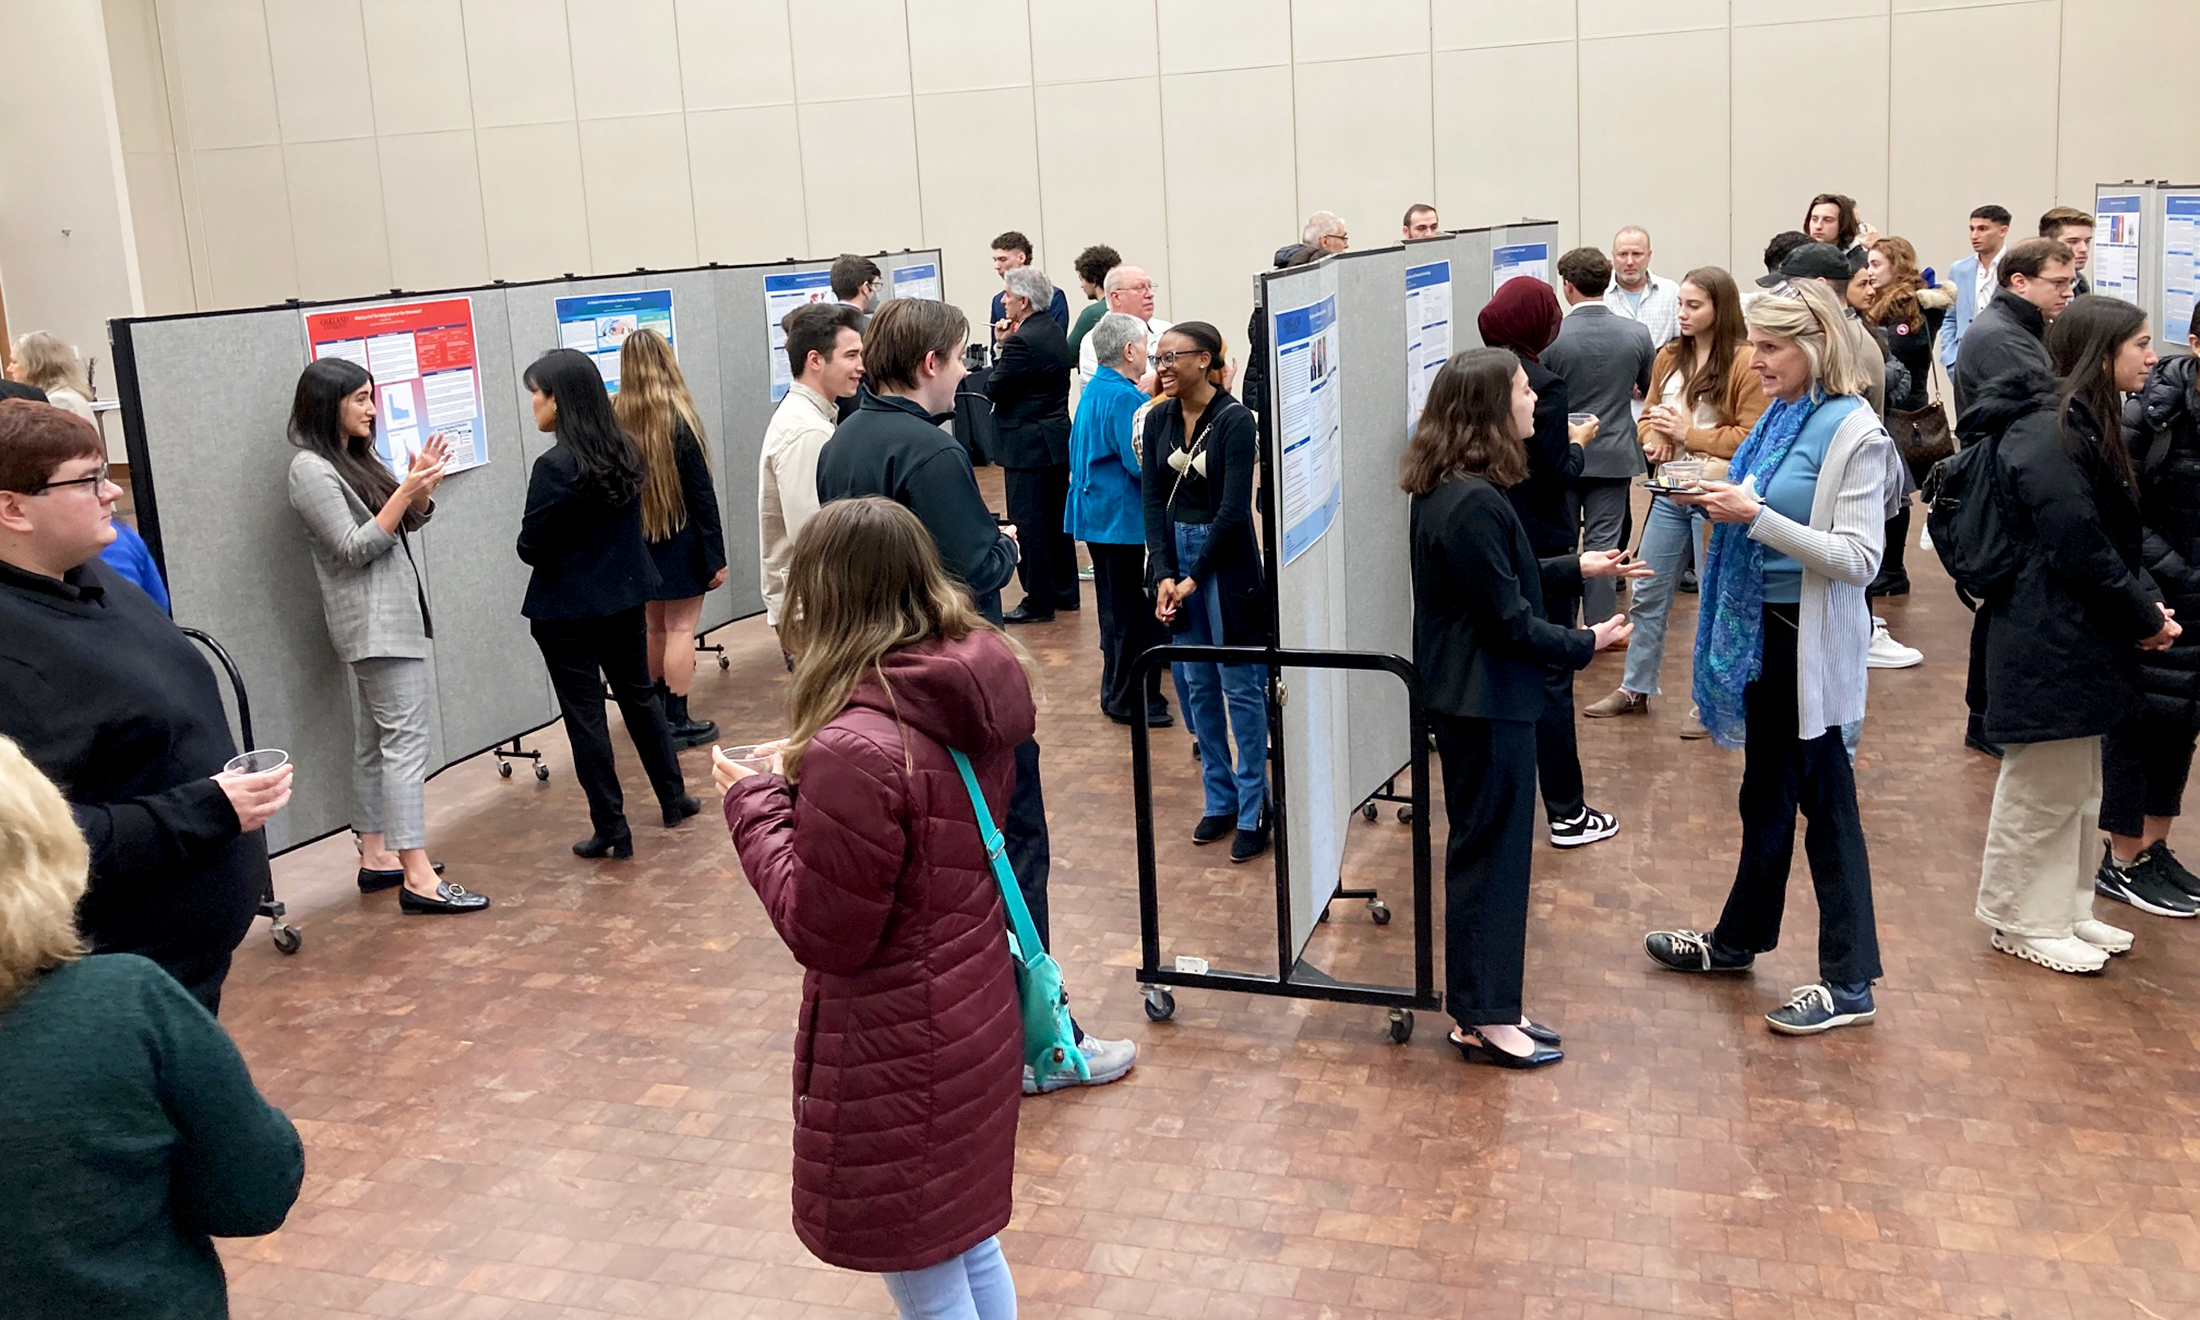 Research symposium featuring Nu Omega students